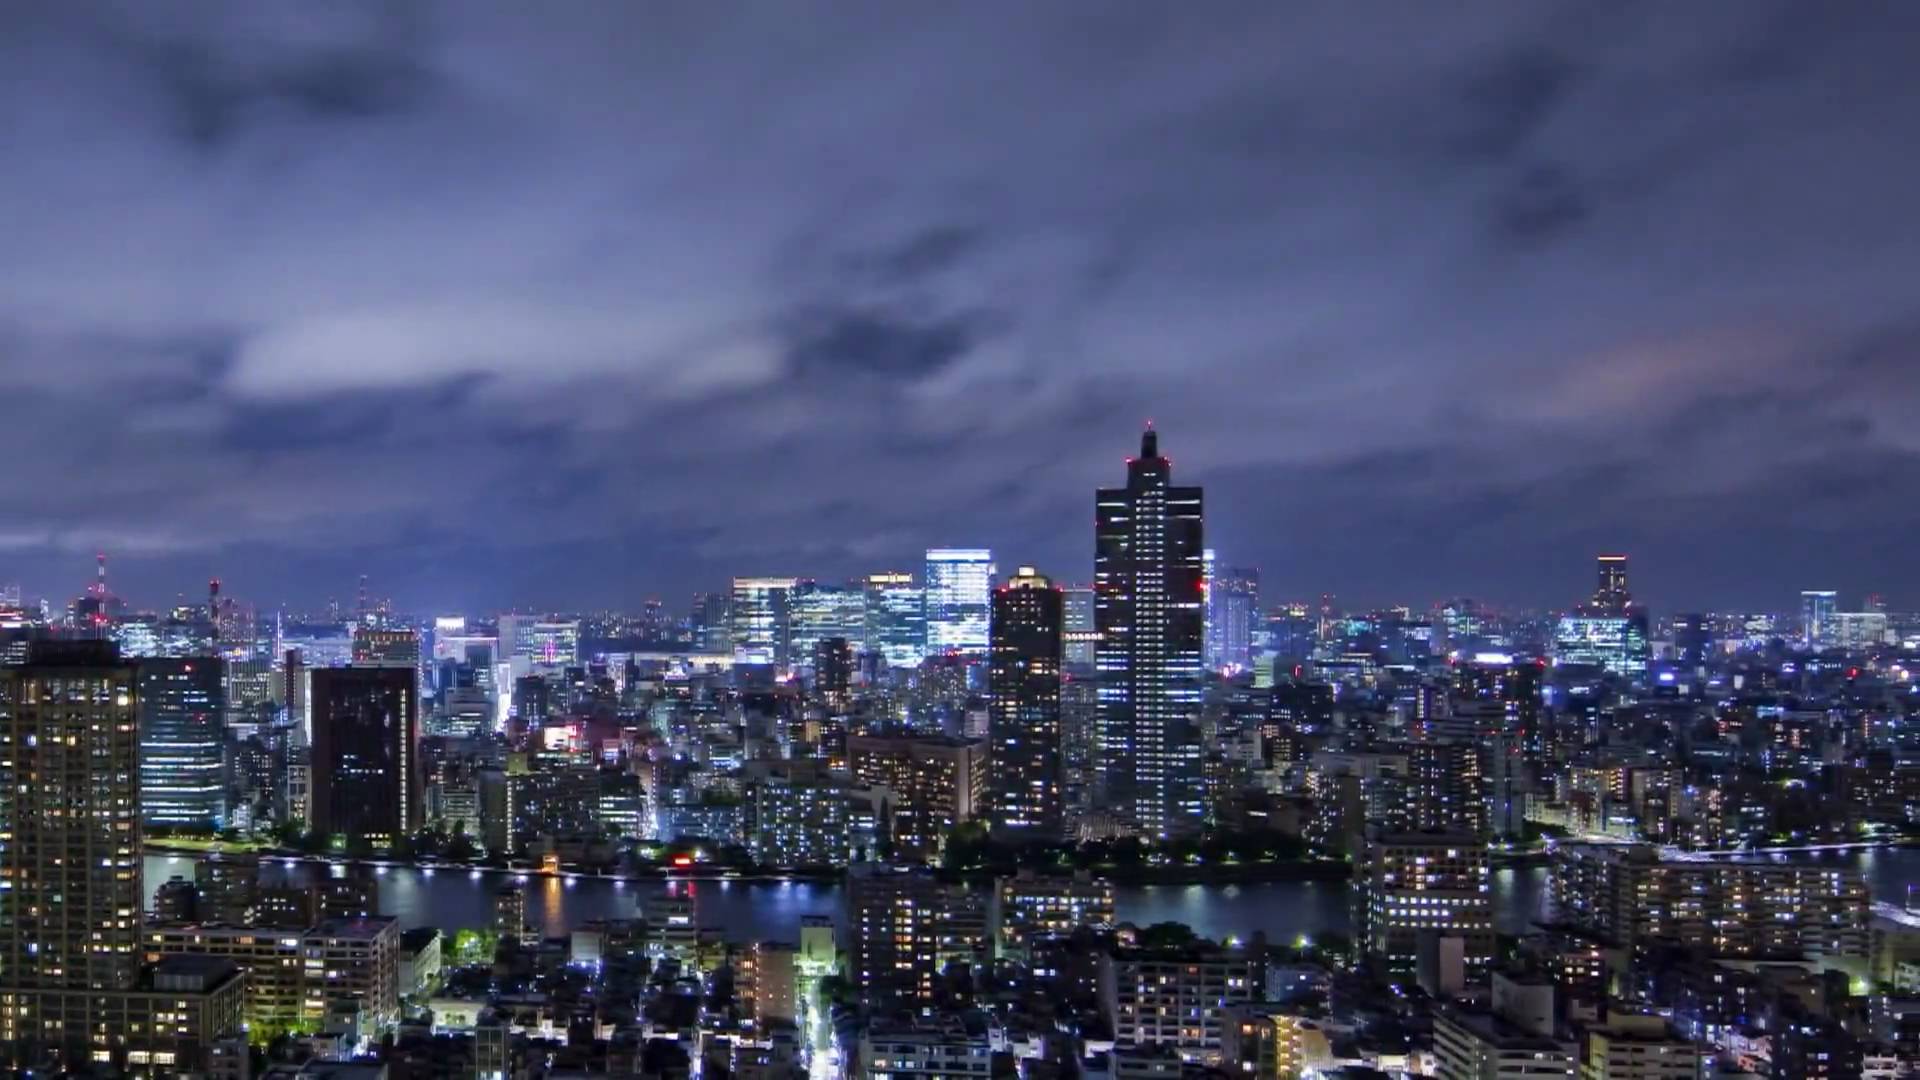 TOKYO CITY NIGHT VIEW / TIMALAPSE PHOTOGRAPHY - YouTube